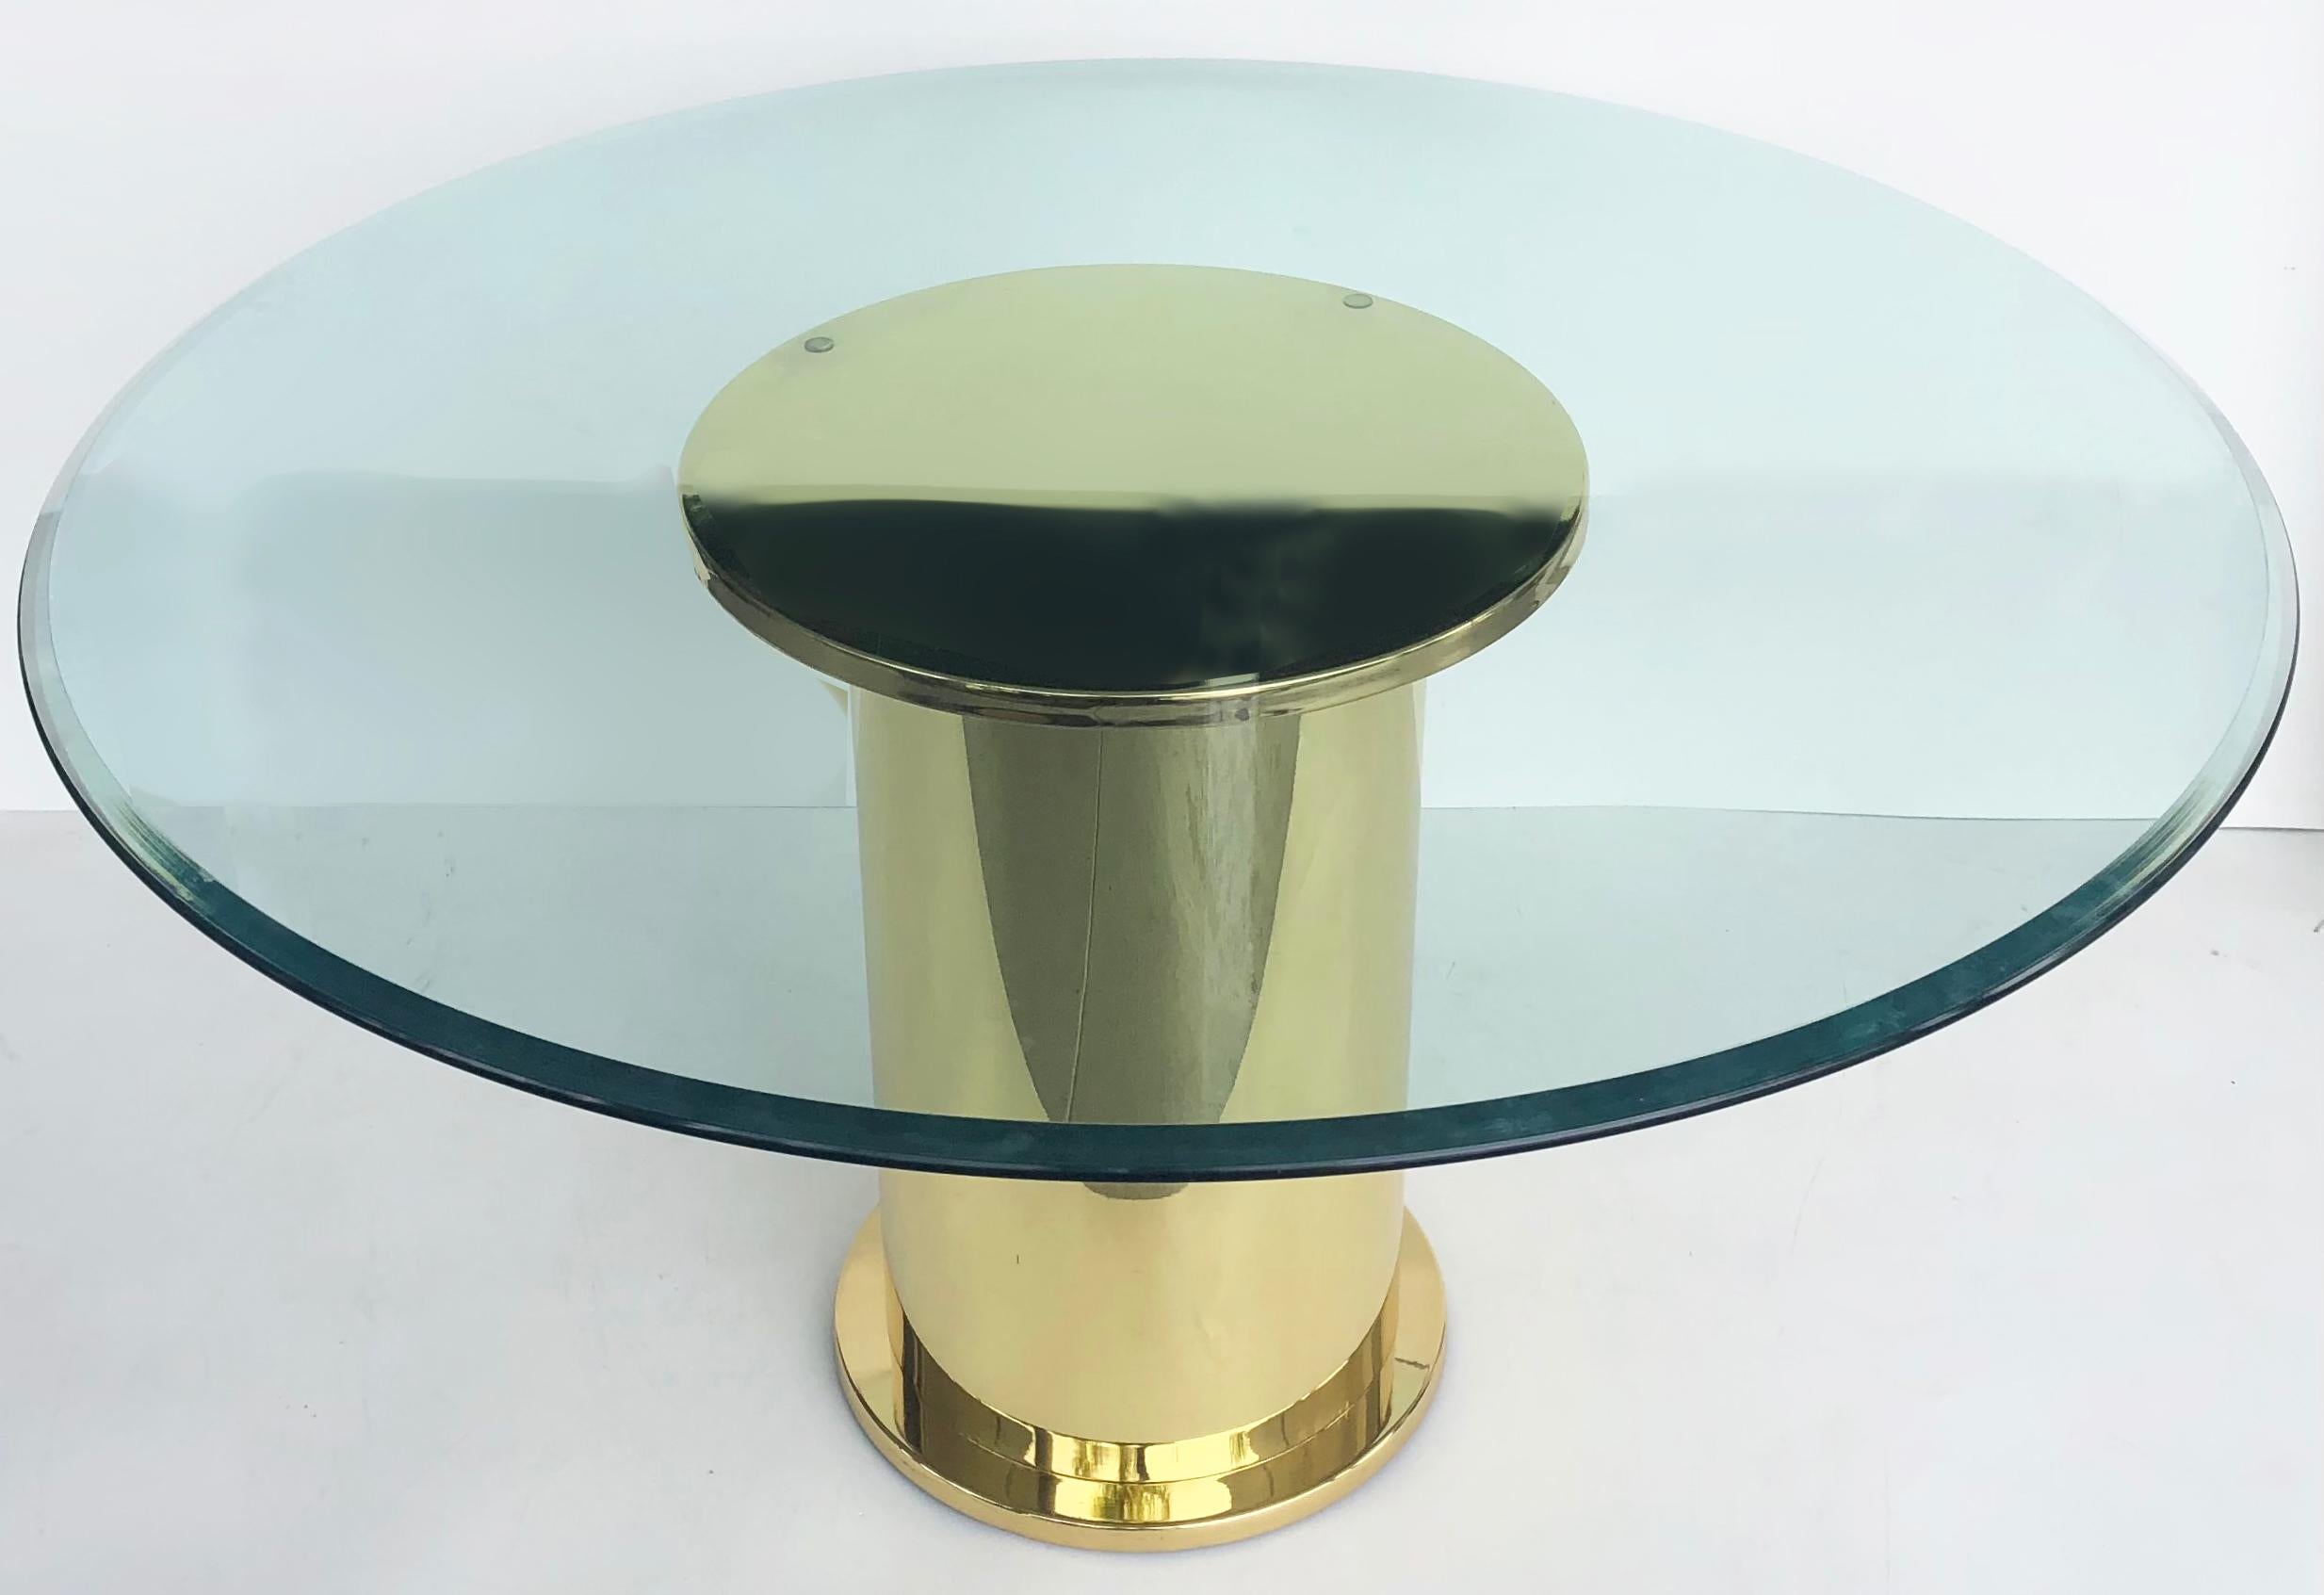 Vintage polished brass dining center table with glass top

Offered for sale is a stunning polished brass pedestal base dining or center table with a round glass top. This fine-quality table is substantial and clean-lined yet elegant.